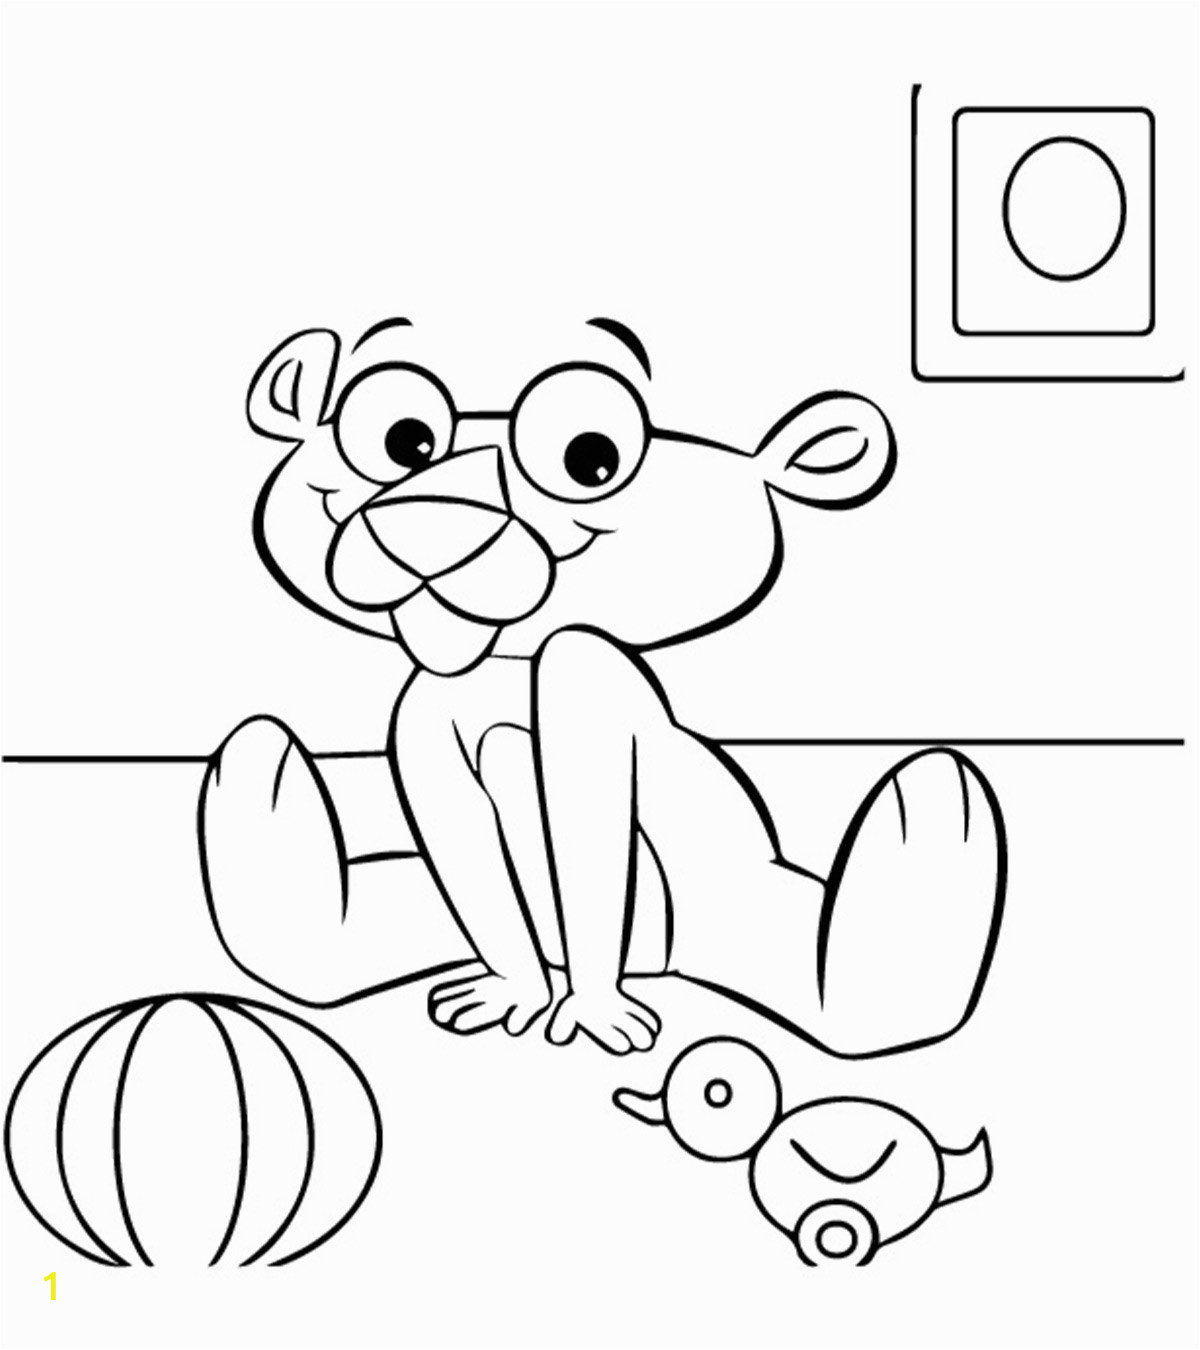 Pink Panther Coloring Pages Free top 10 Pink Panther Coloring Pages for Your toddler